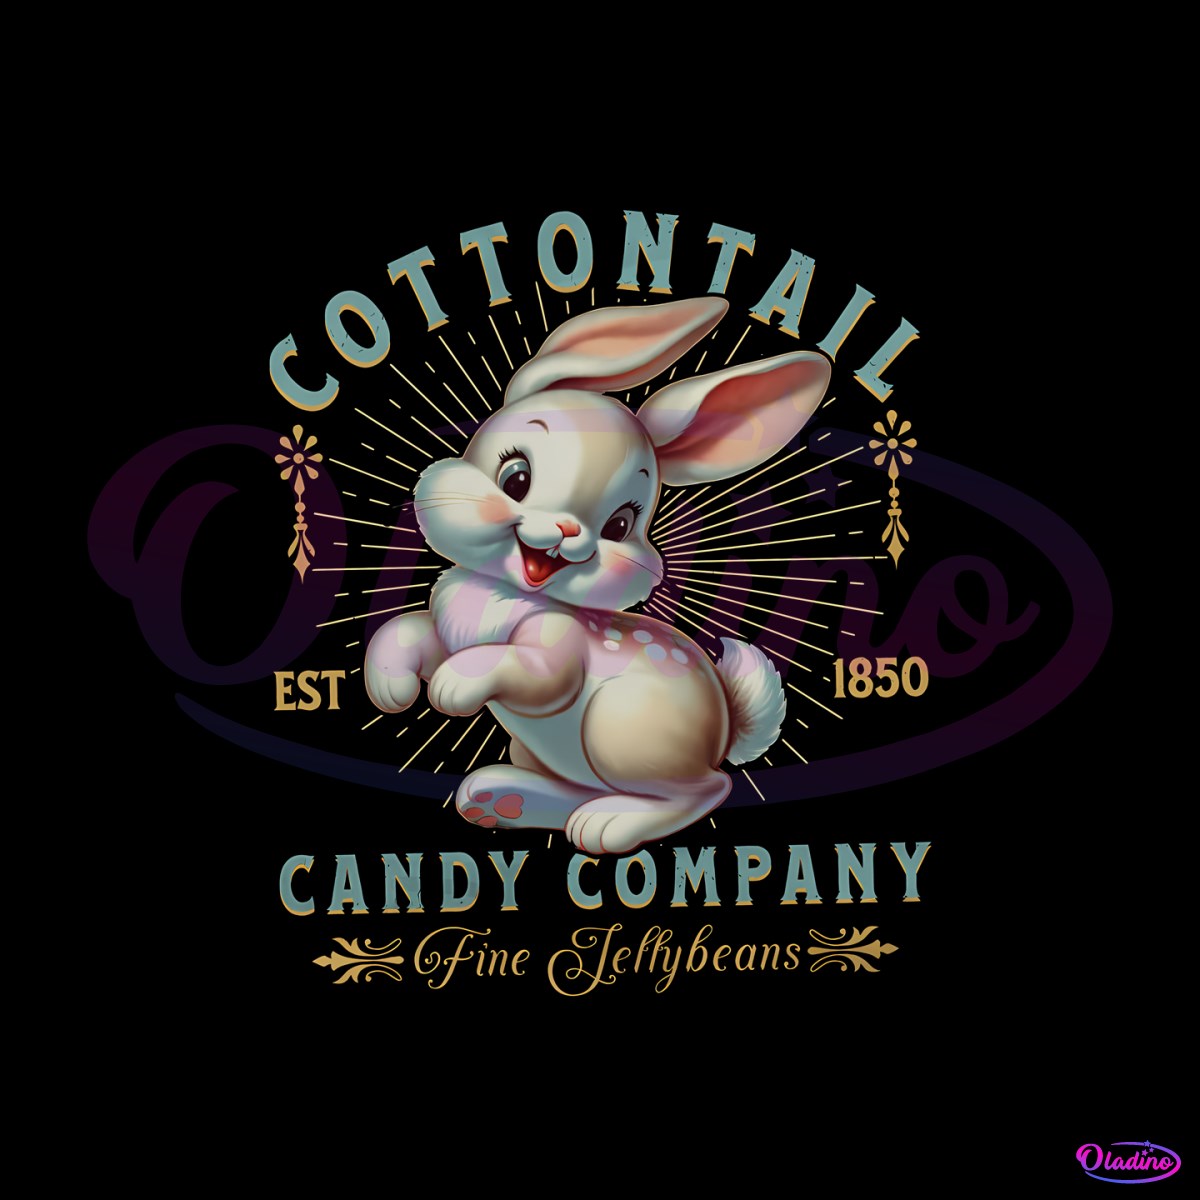 cottontail-candy-company-est-1850-png